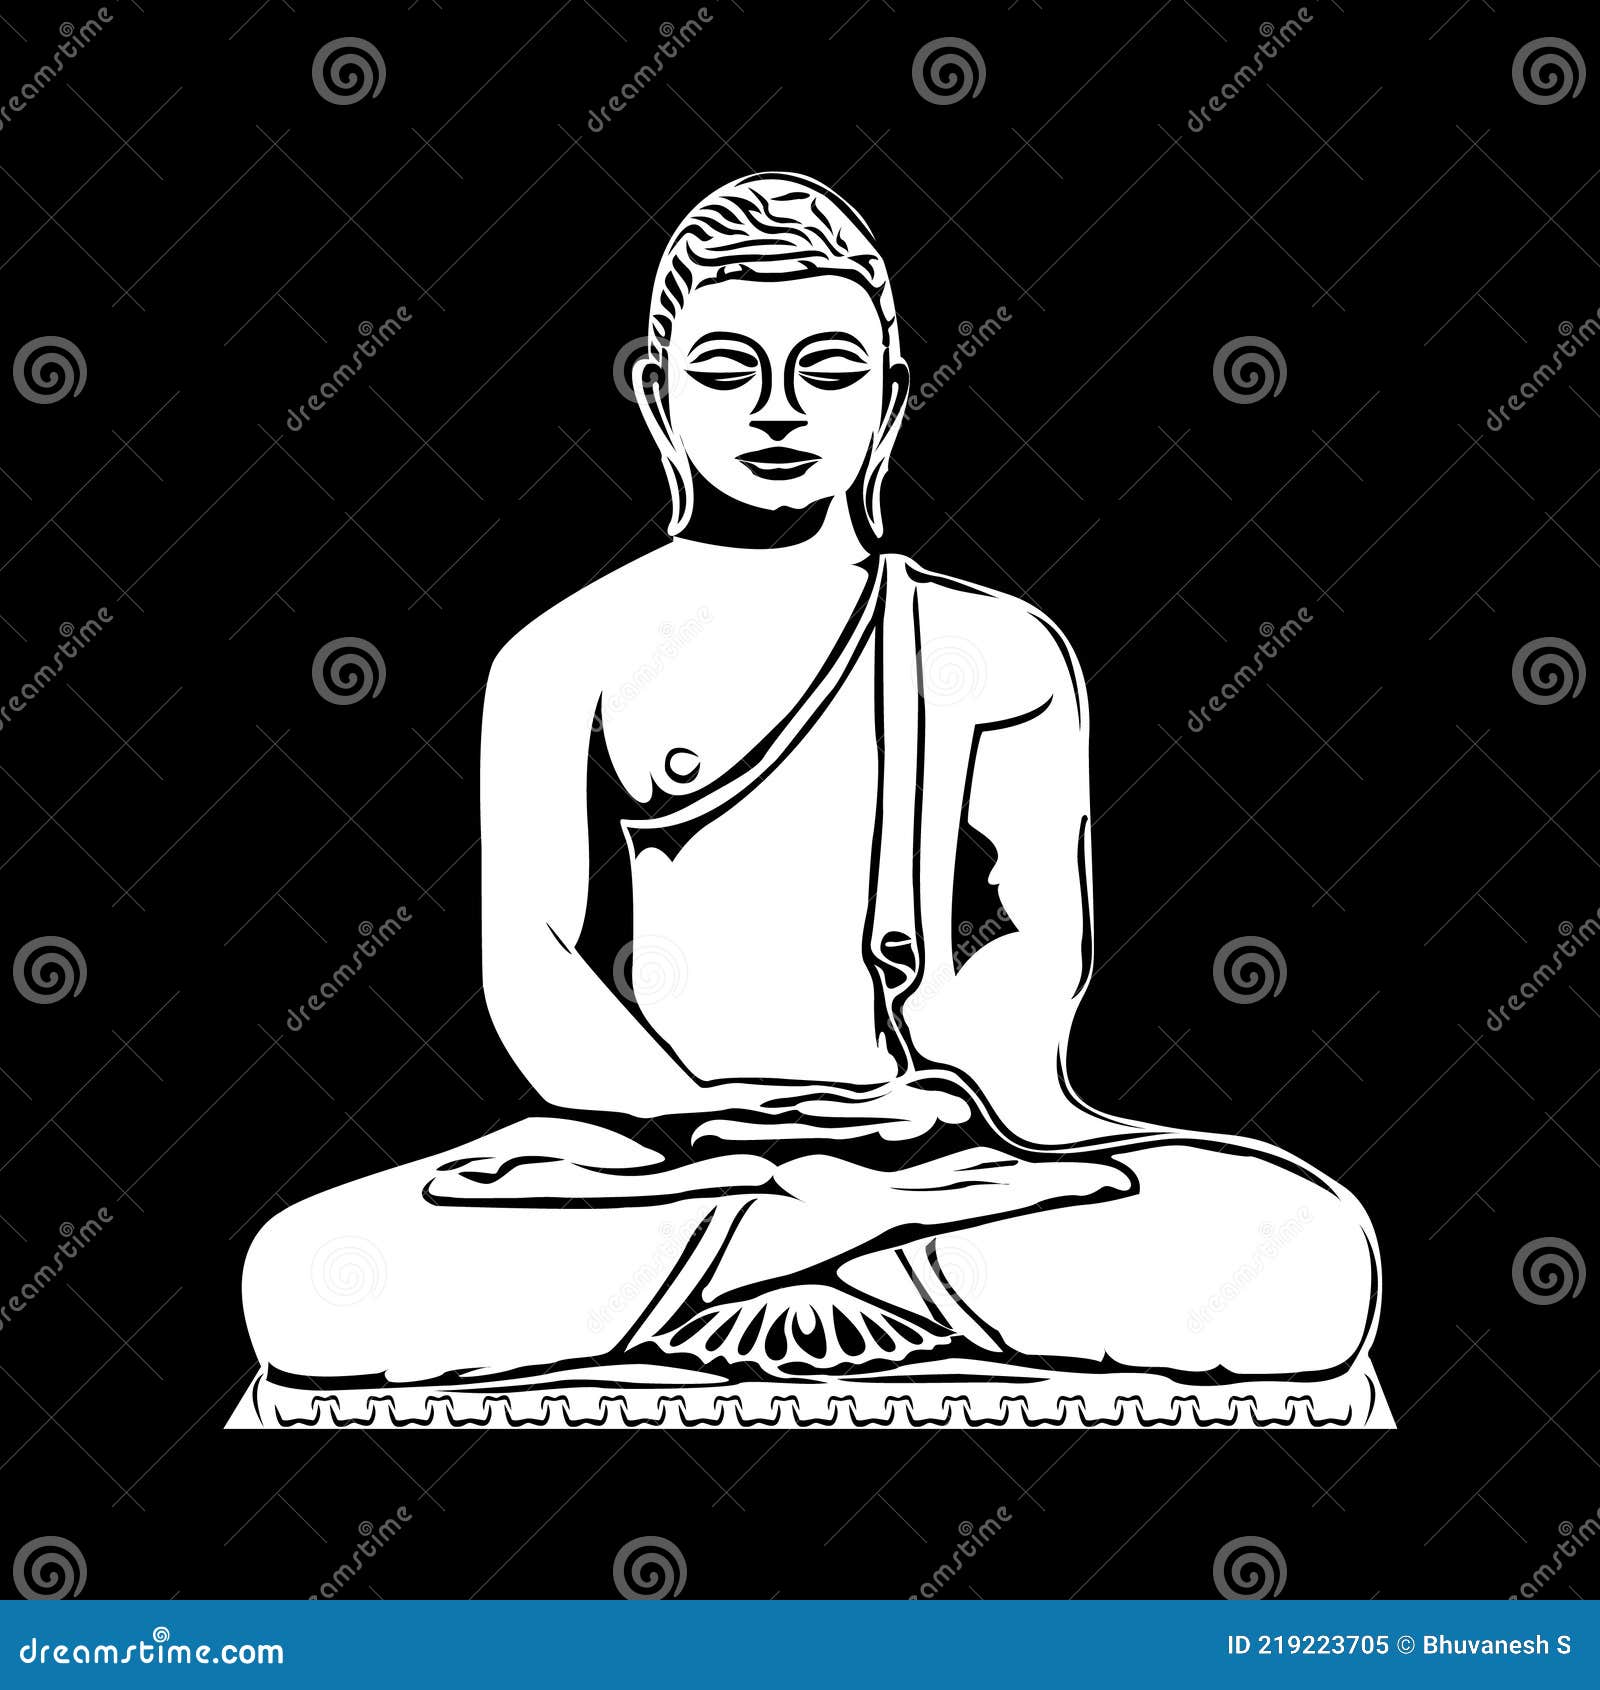 Browse thousands of Buddha Vector images for design inspiration